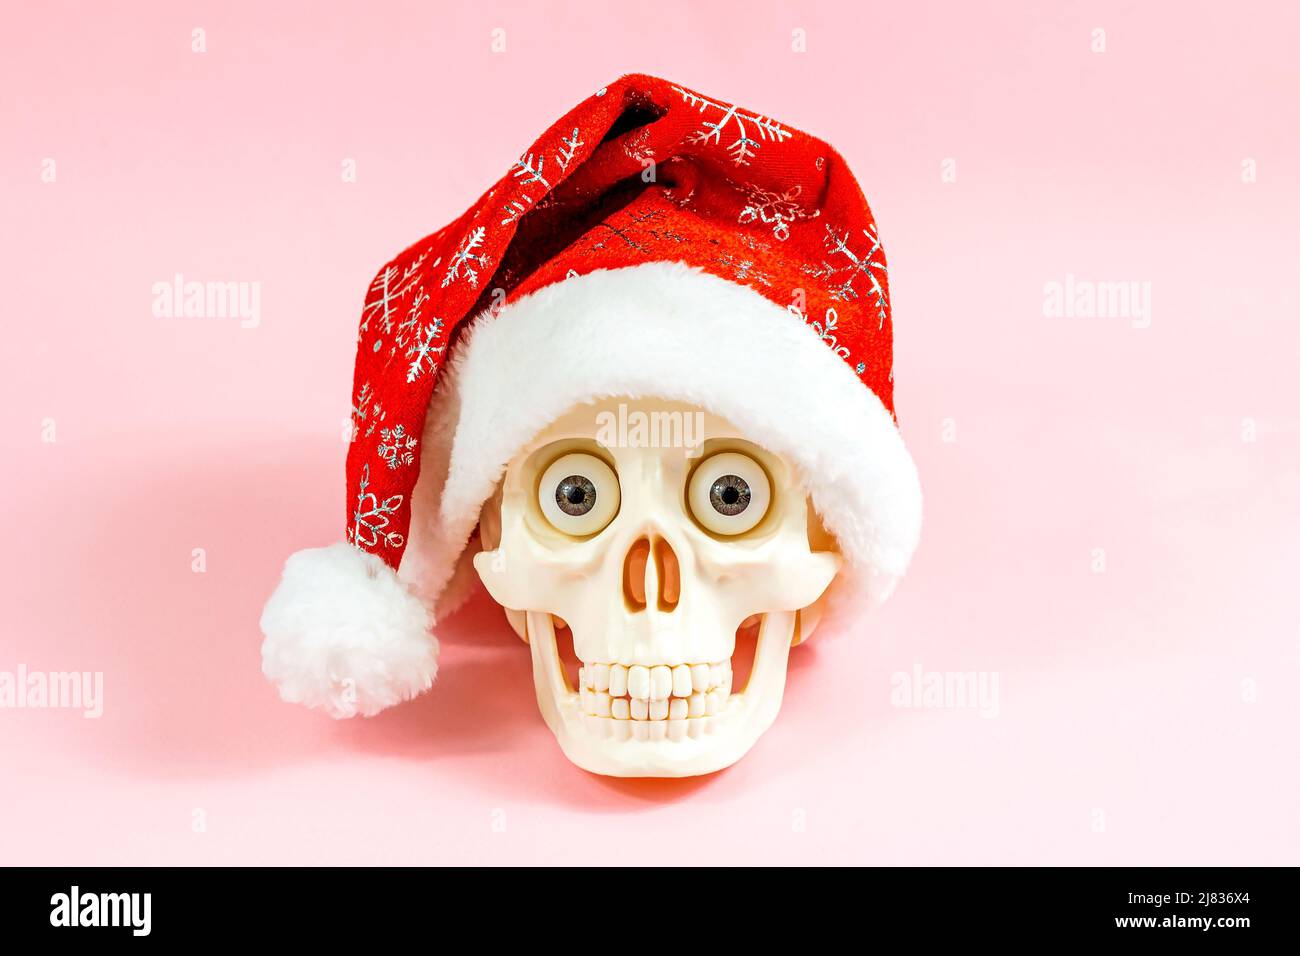 Skull in a Christmas Hat Straw Topper Graphic by